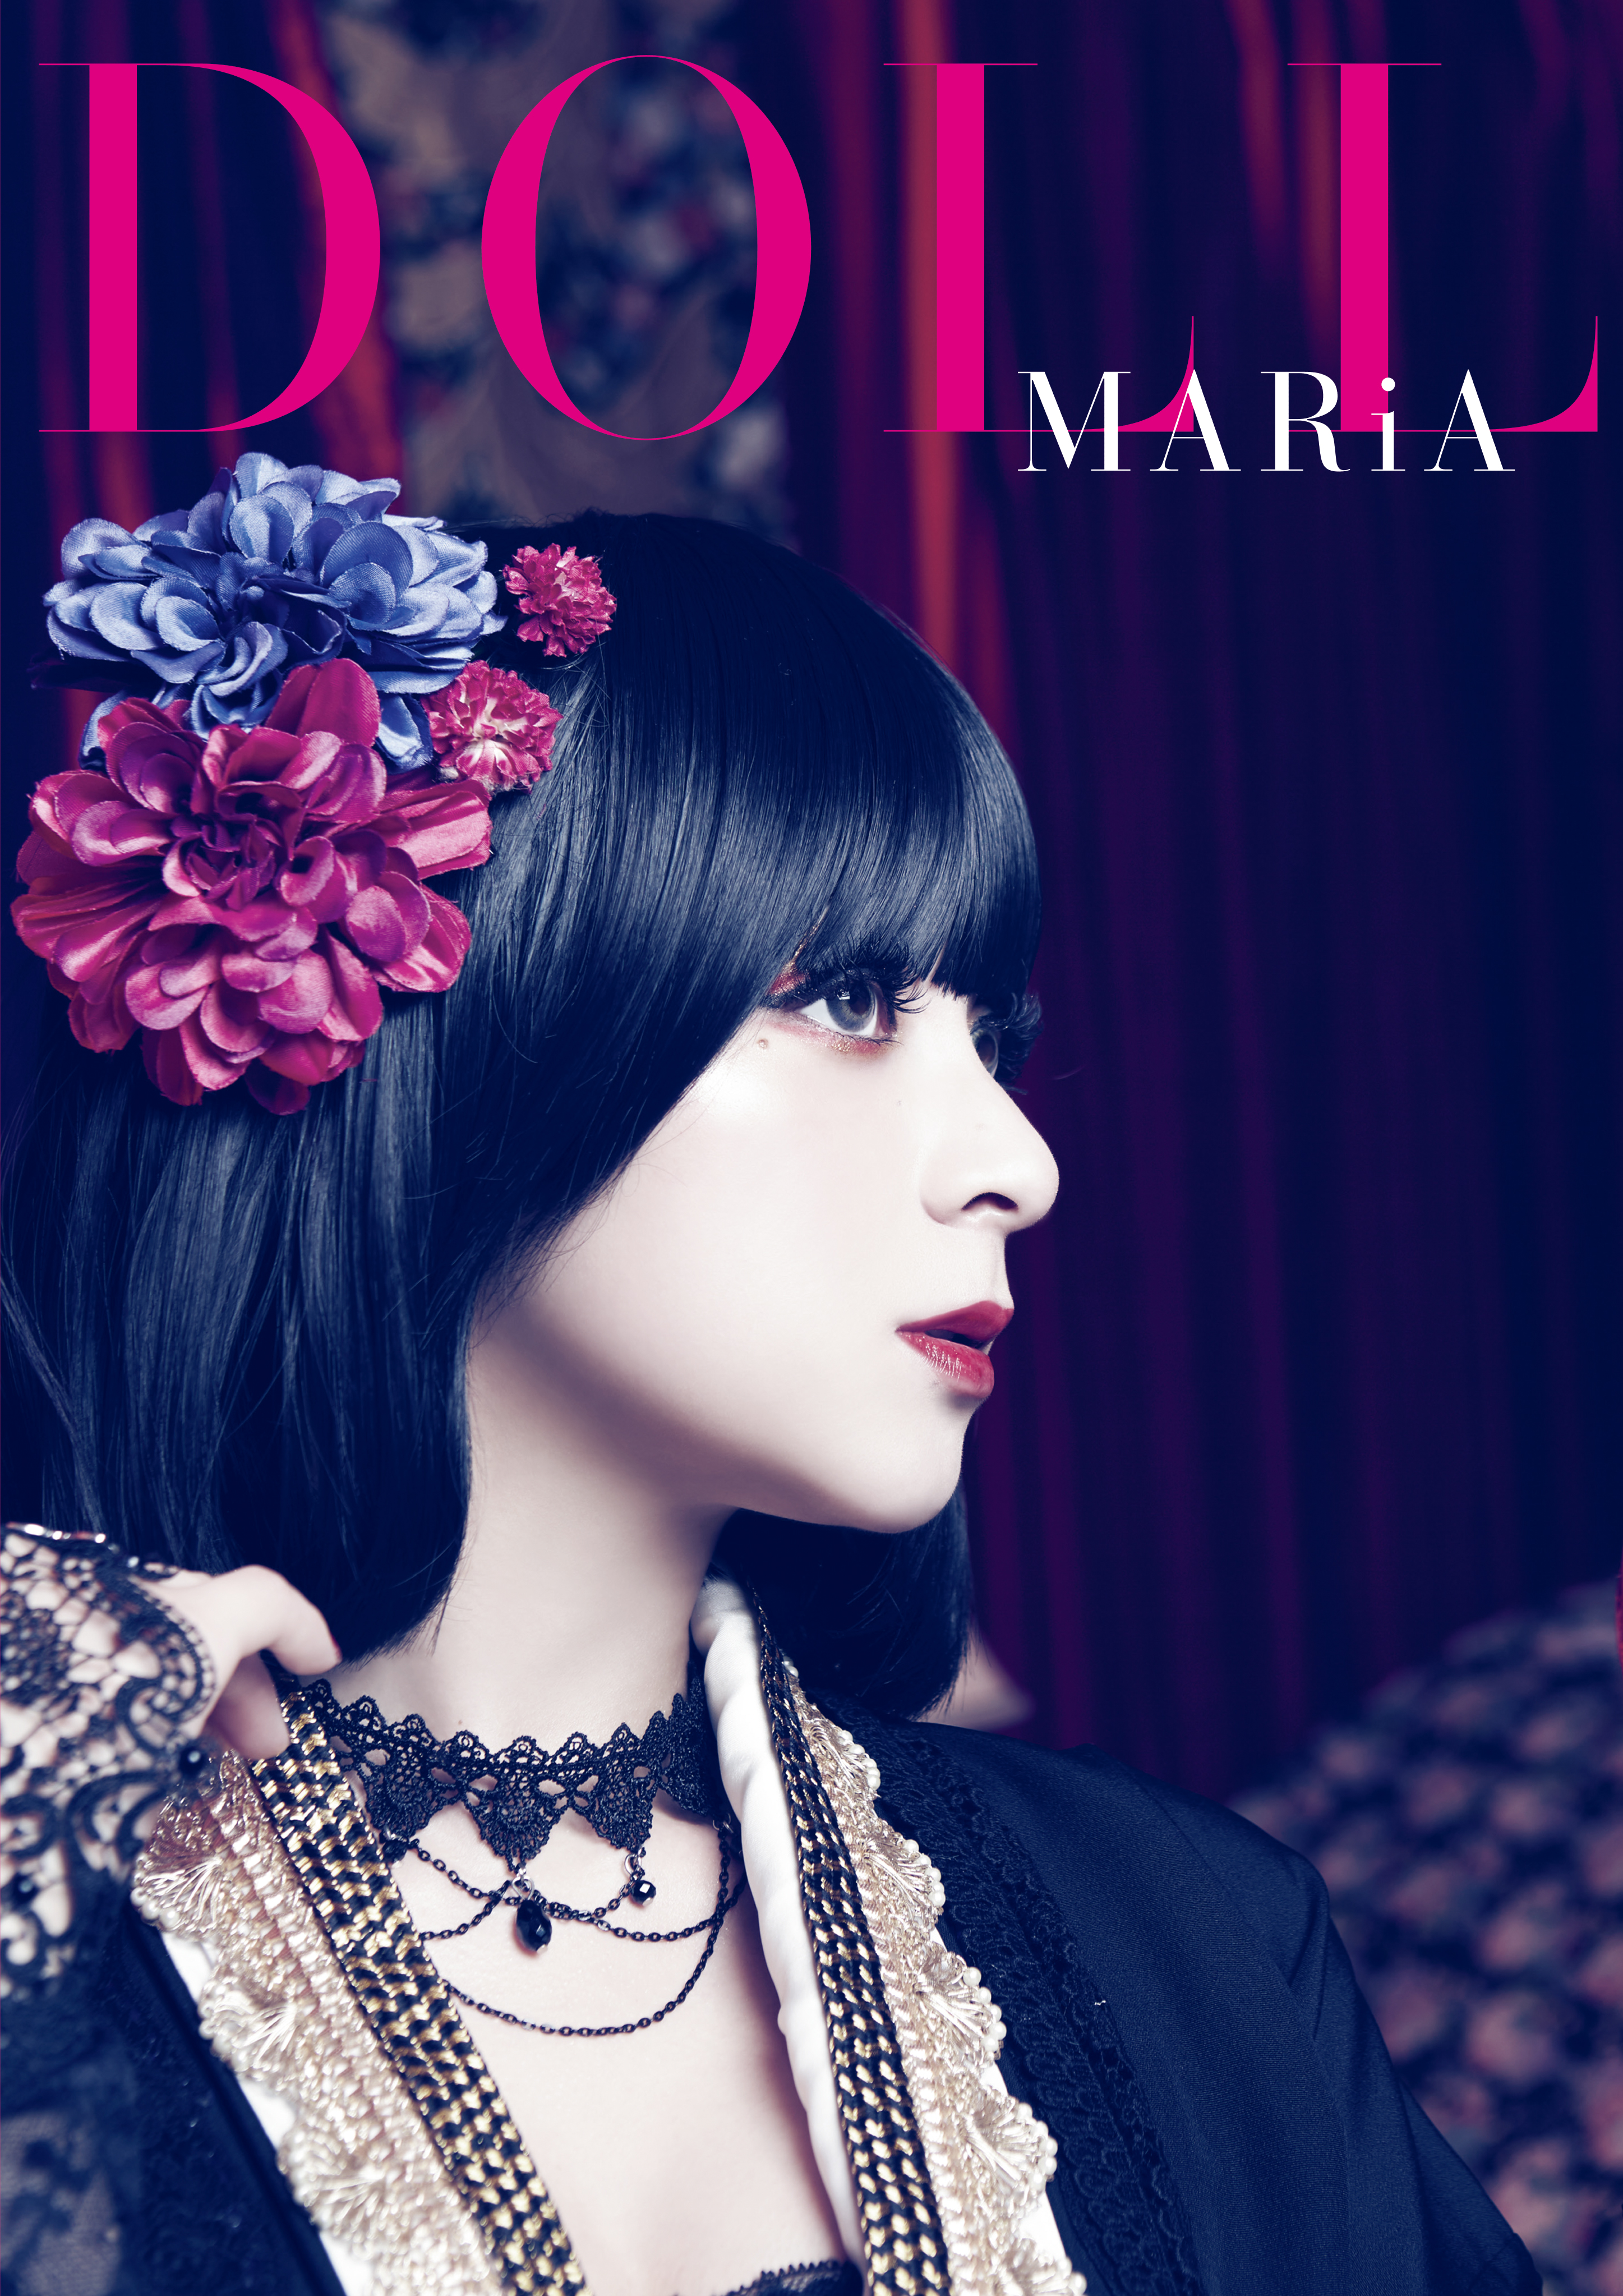 MARiA Photobook “DOLL” Release on Aug 26th,2022